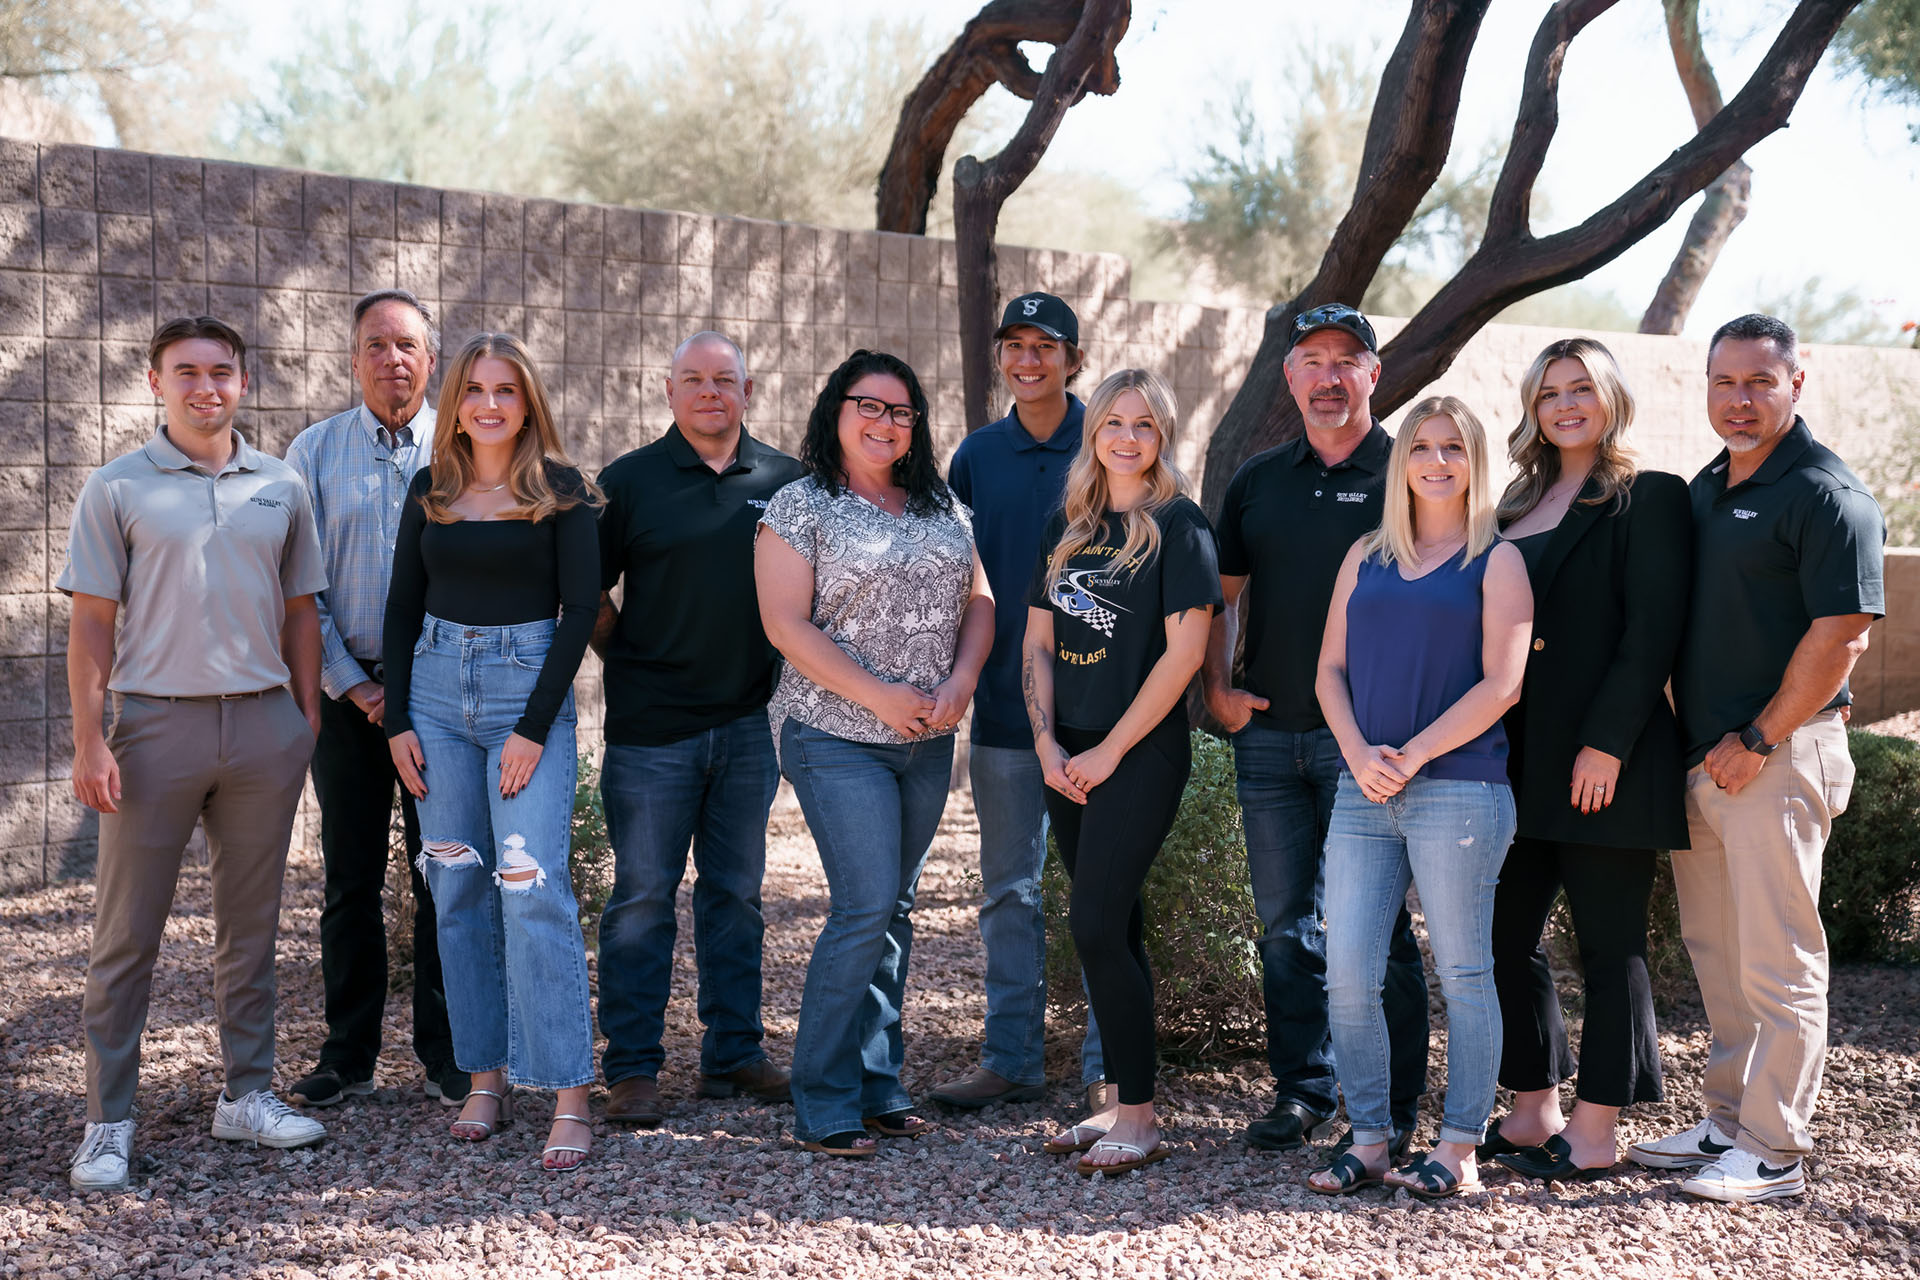 the team at sun valley builders